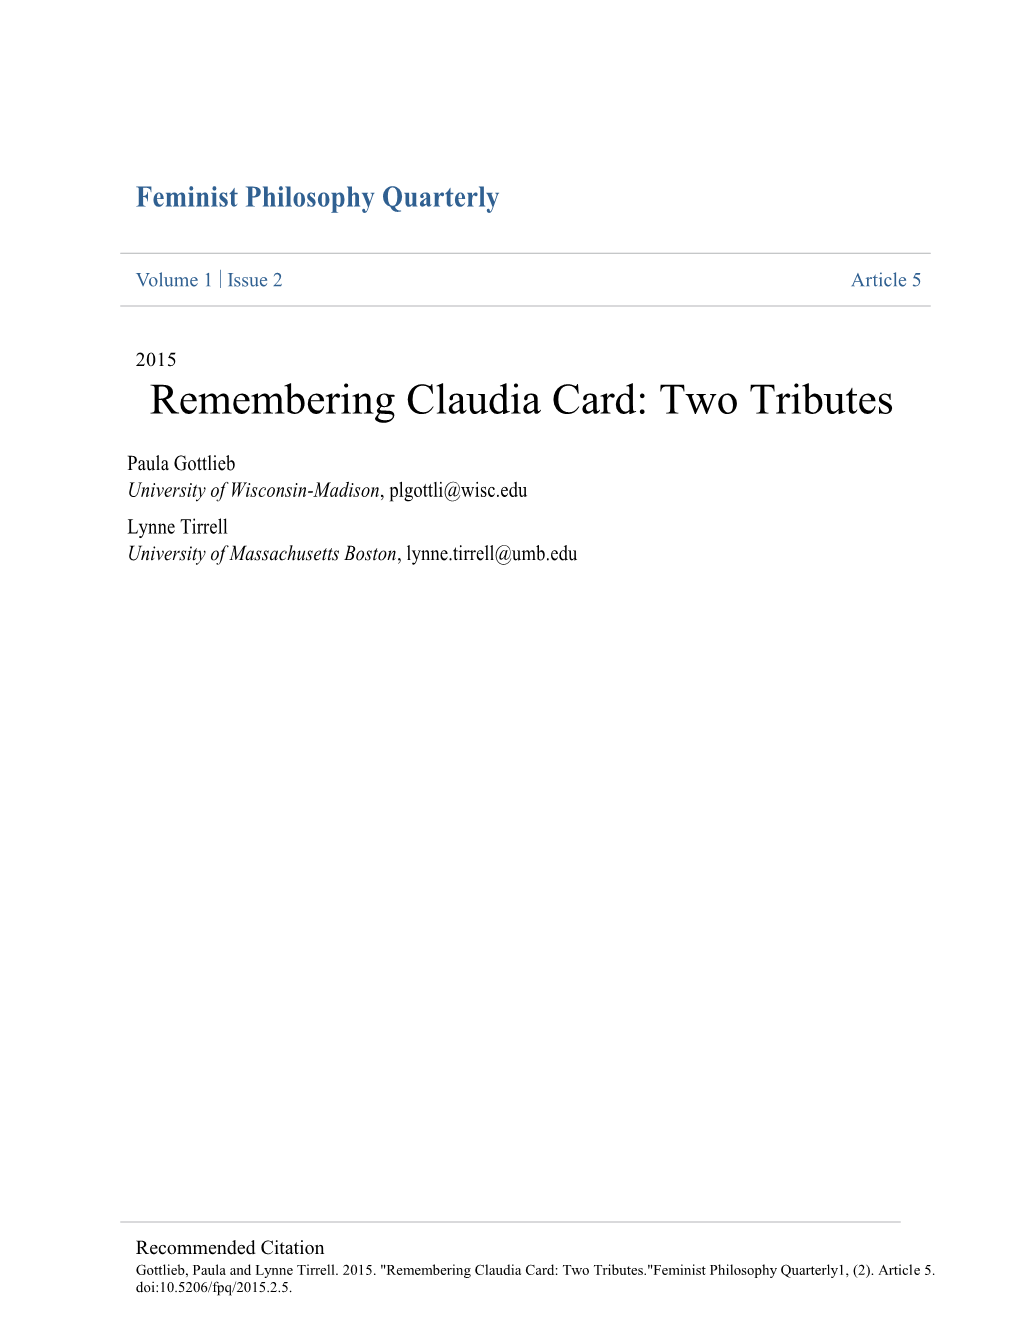 Remembering Claudia Card: Two Tributes